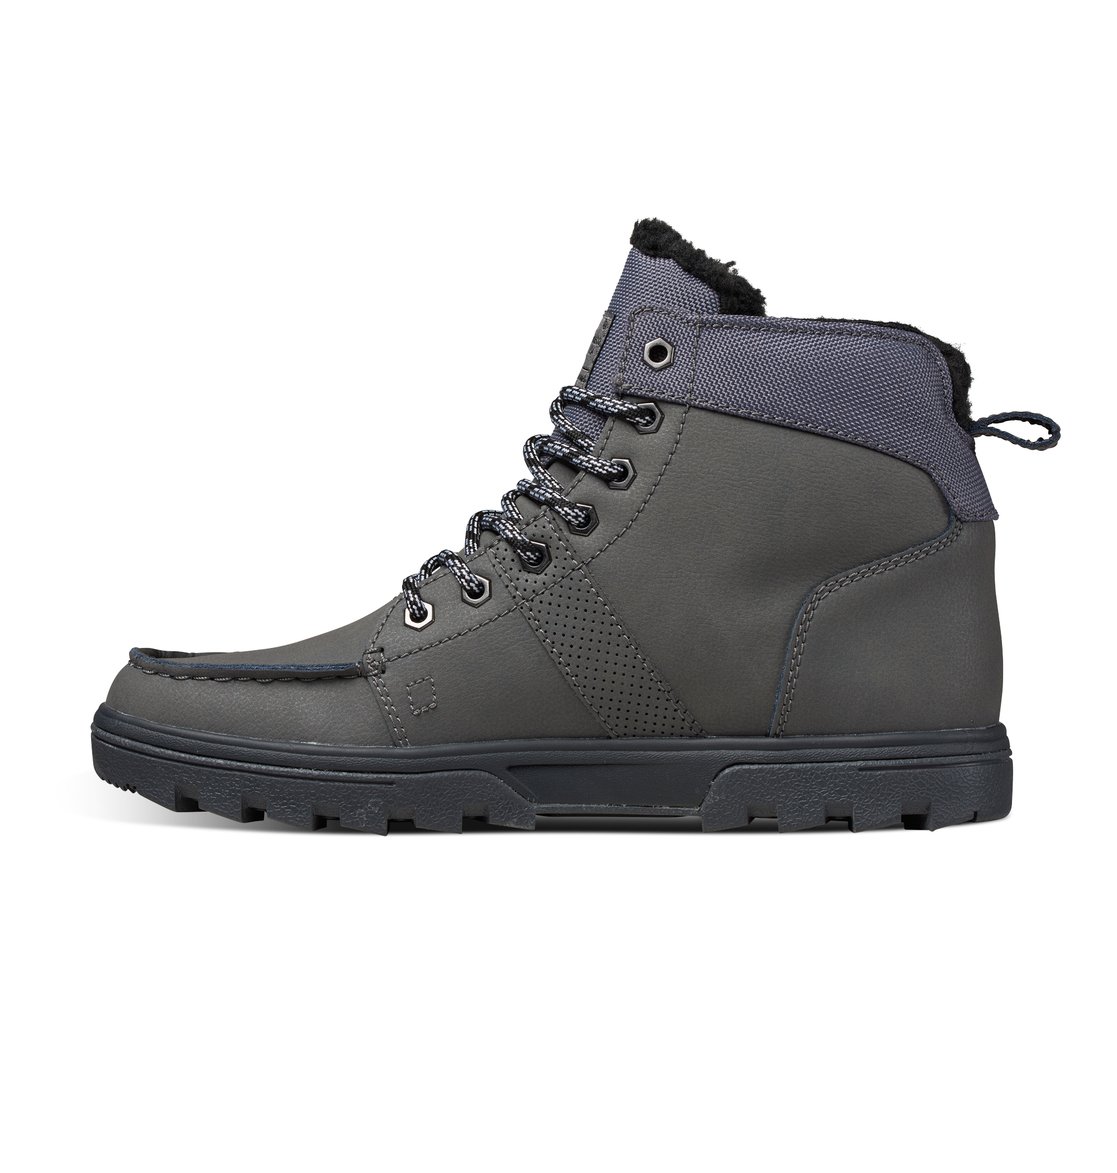 DC Shoes™ Woodland Winter Weather Boots 303241 | eBay